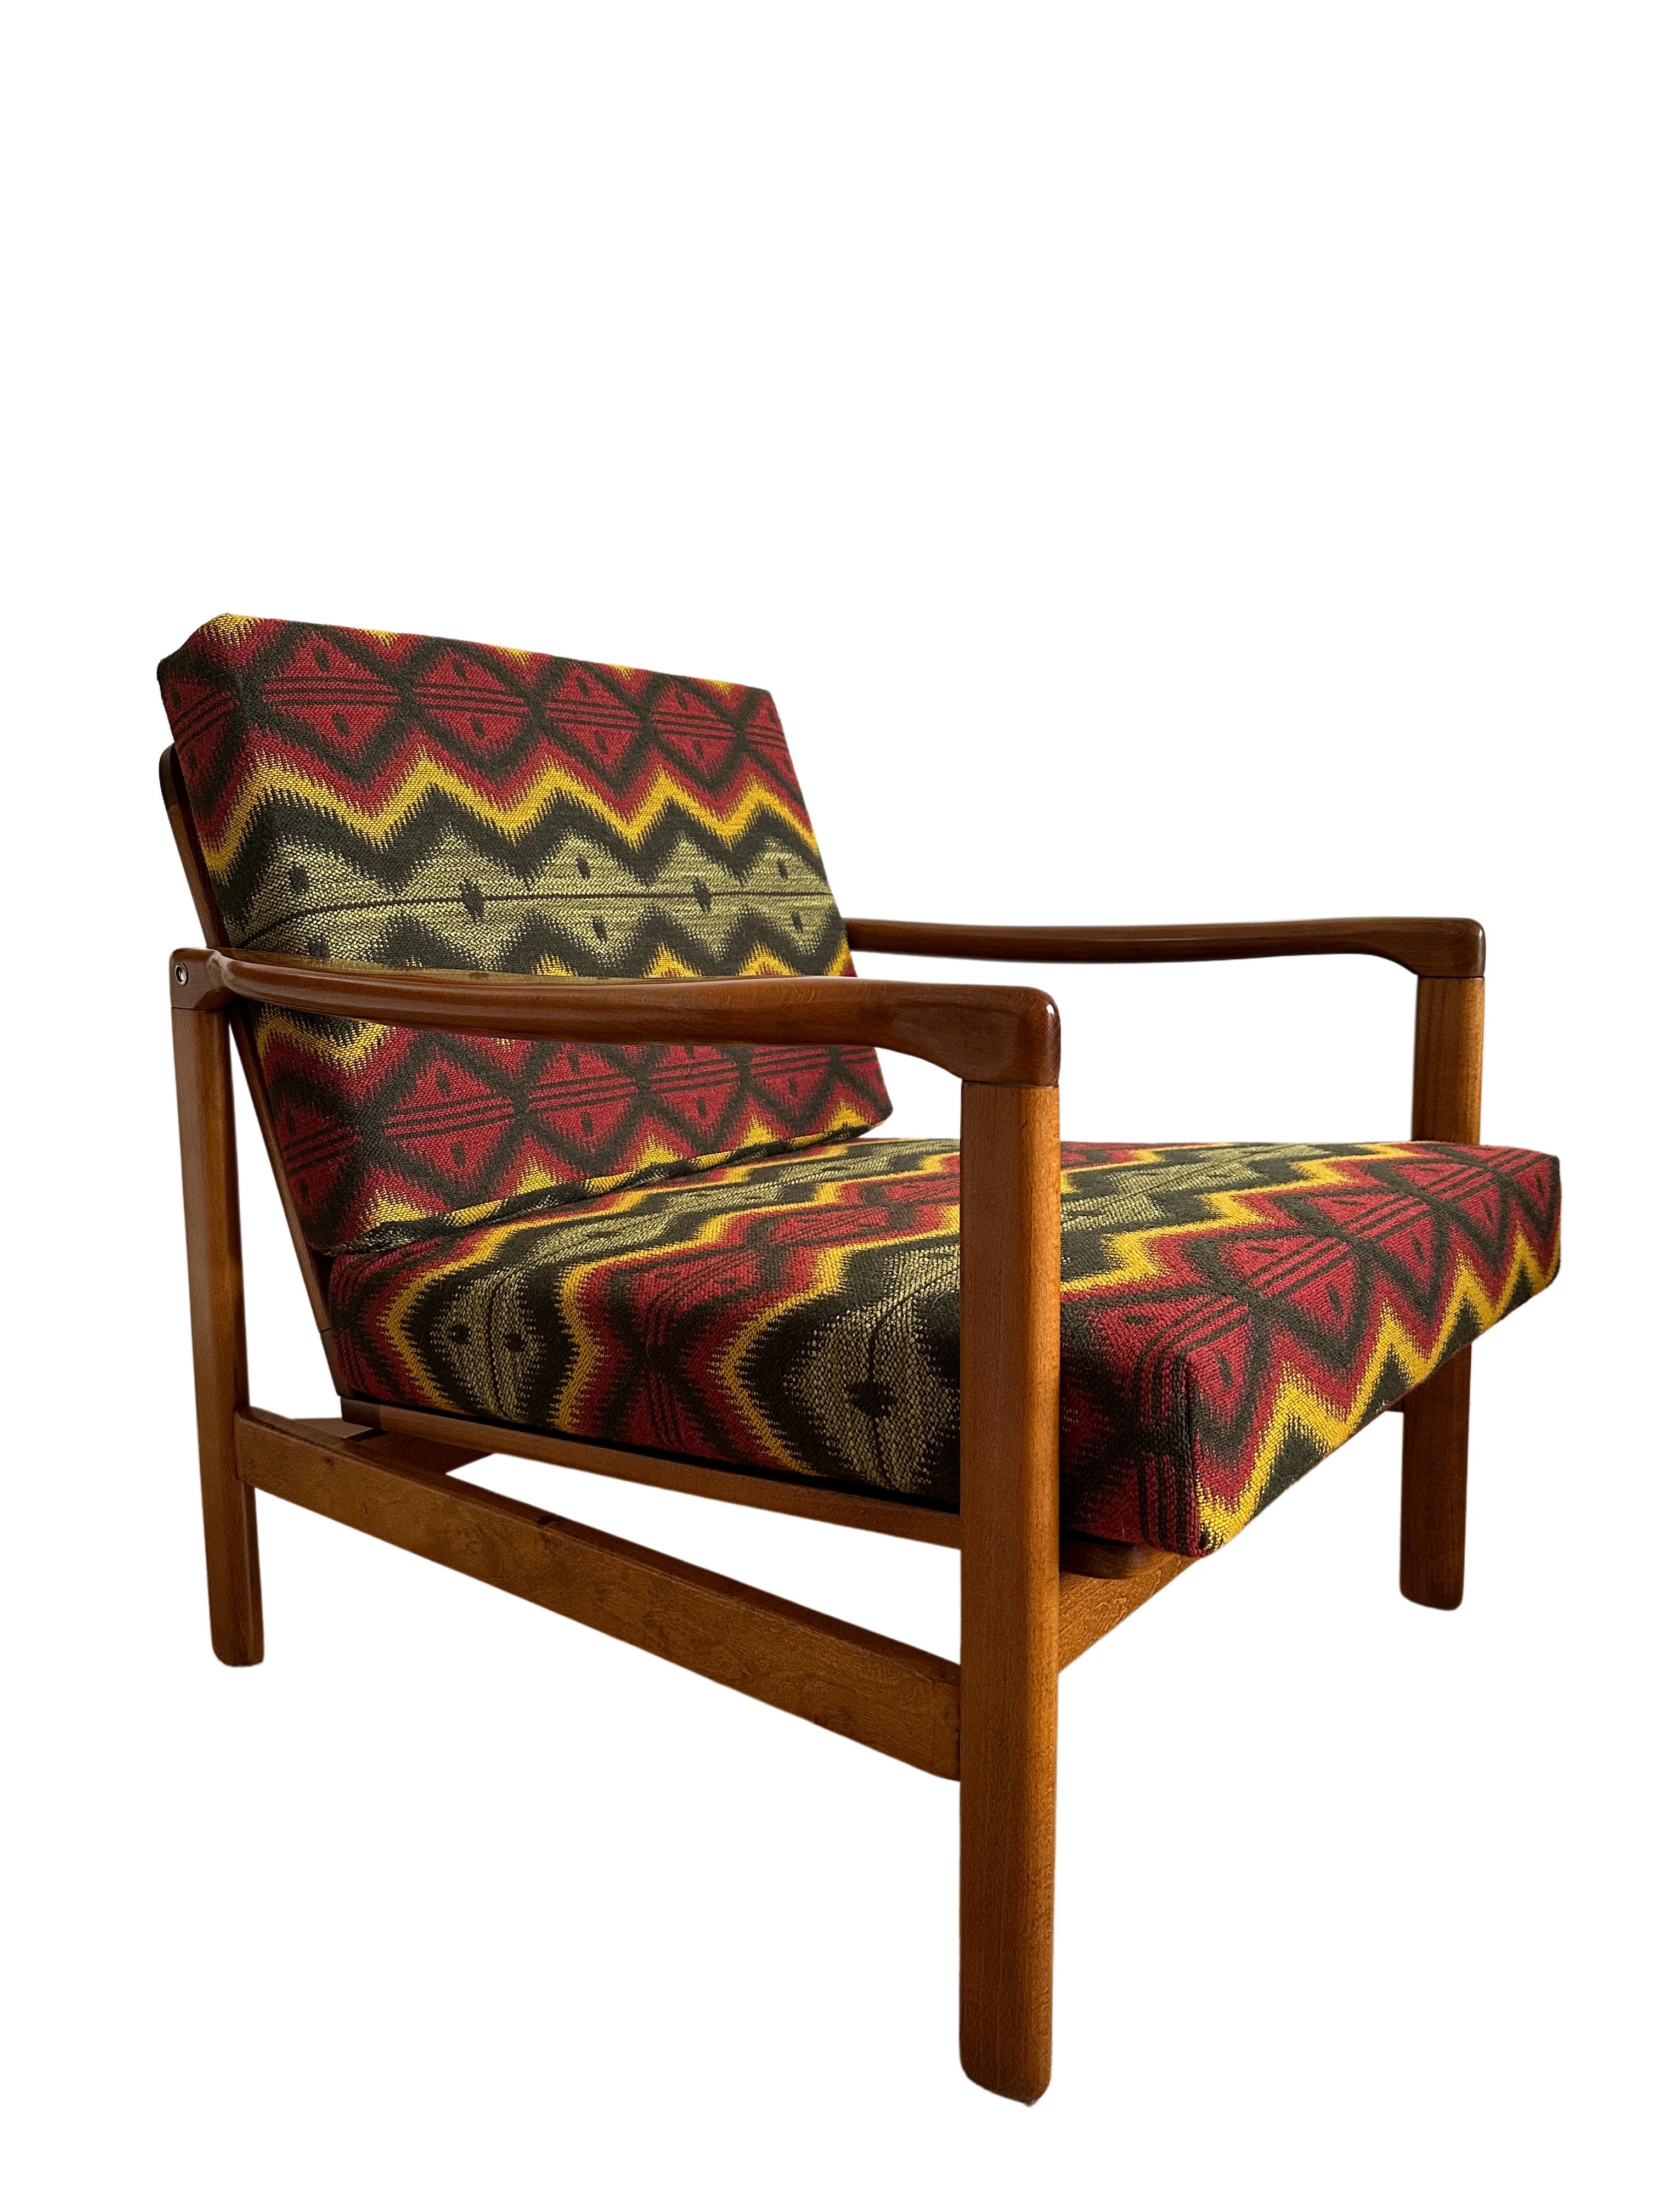 Beautiful and very comfortable lounge chair model B-7752, designed by Zenon Baczyk, has been manufactured by Swarzedzkie Fabryki Mebli in Poland in the 1960s. 

The structure is made of beech wood in deep honey brown color, finished with a semi